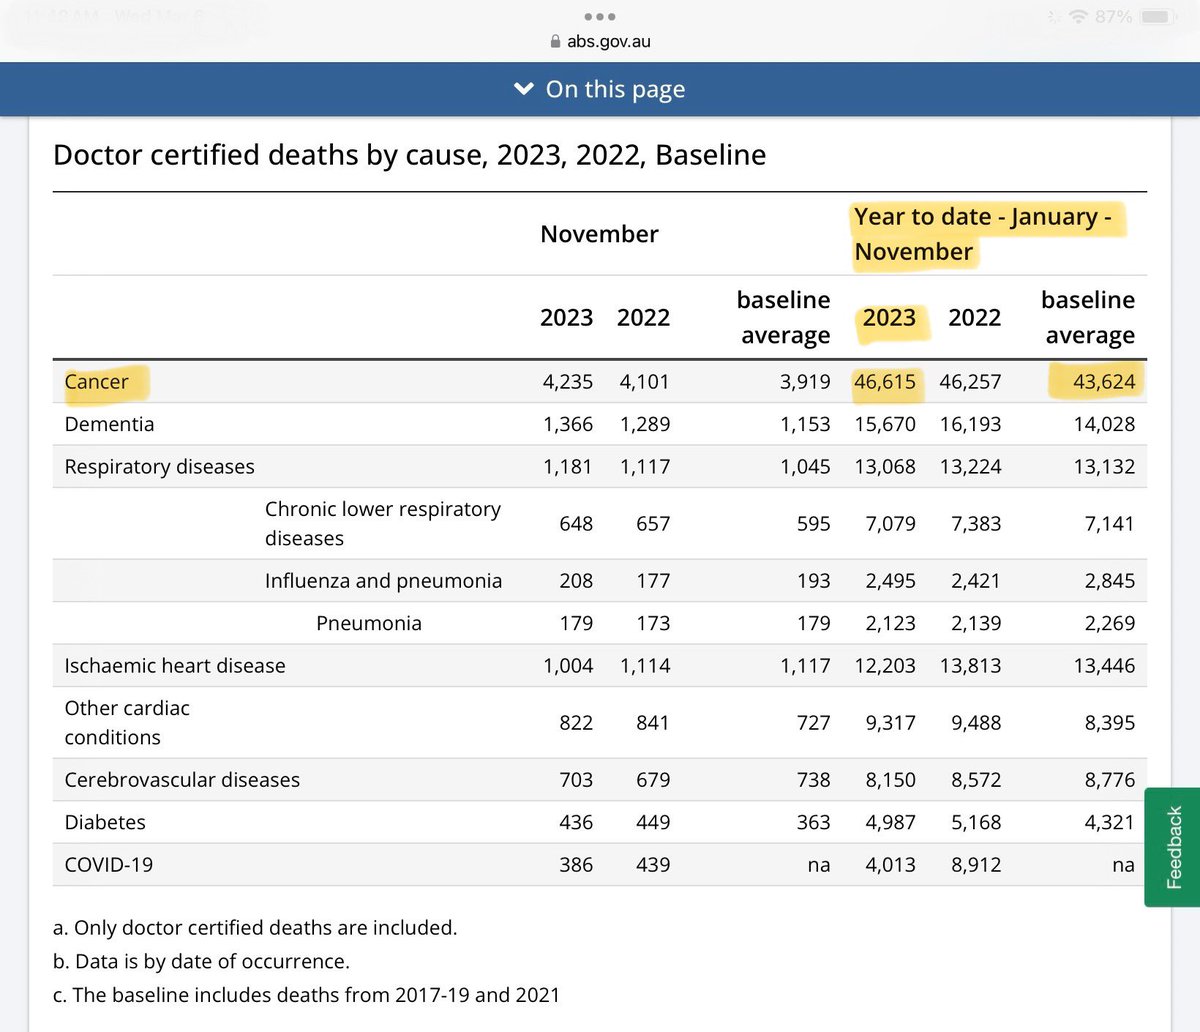 @EthicalSkeptic Hmm, that 6.7% elevation in excess cancer deaths sounds vaguely familiar. Where have I heard that number before? Oh yeah, from the Australian Bureau of Statistics whose official data shows 2023 cancer mortality ~6.5% above baseline (for the first 11 months of 2023).